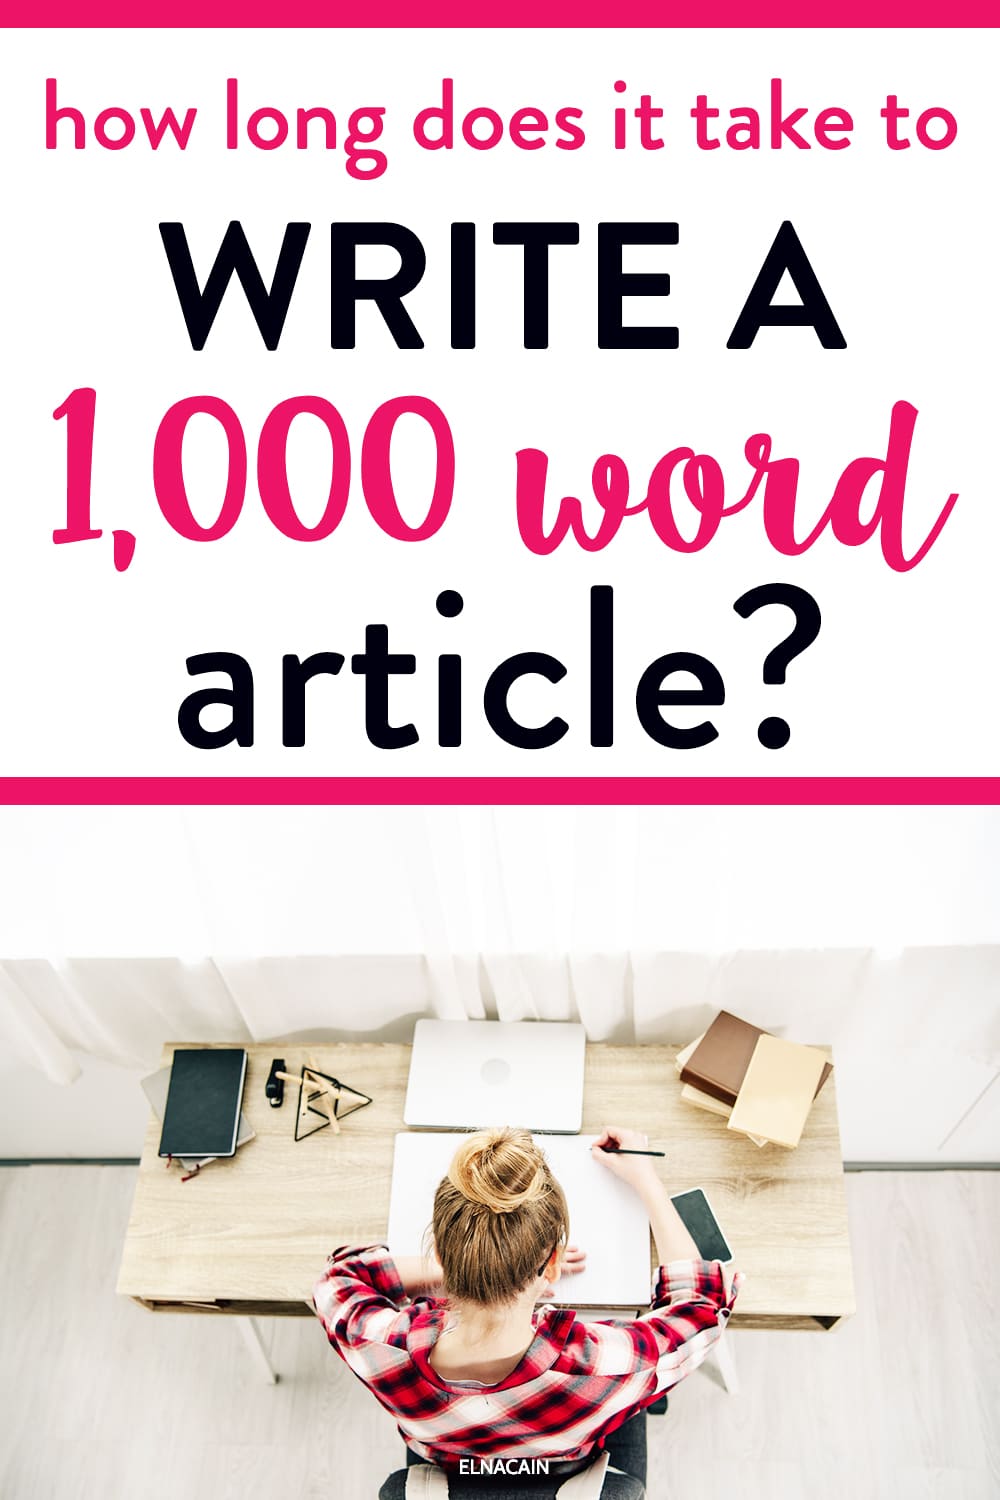 How Long Does it Take to Write a 25,25 Word Article? - Elna Cain